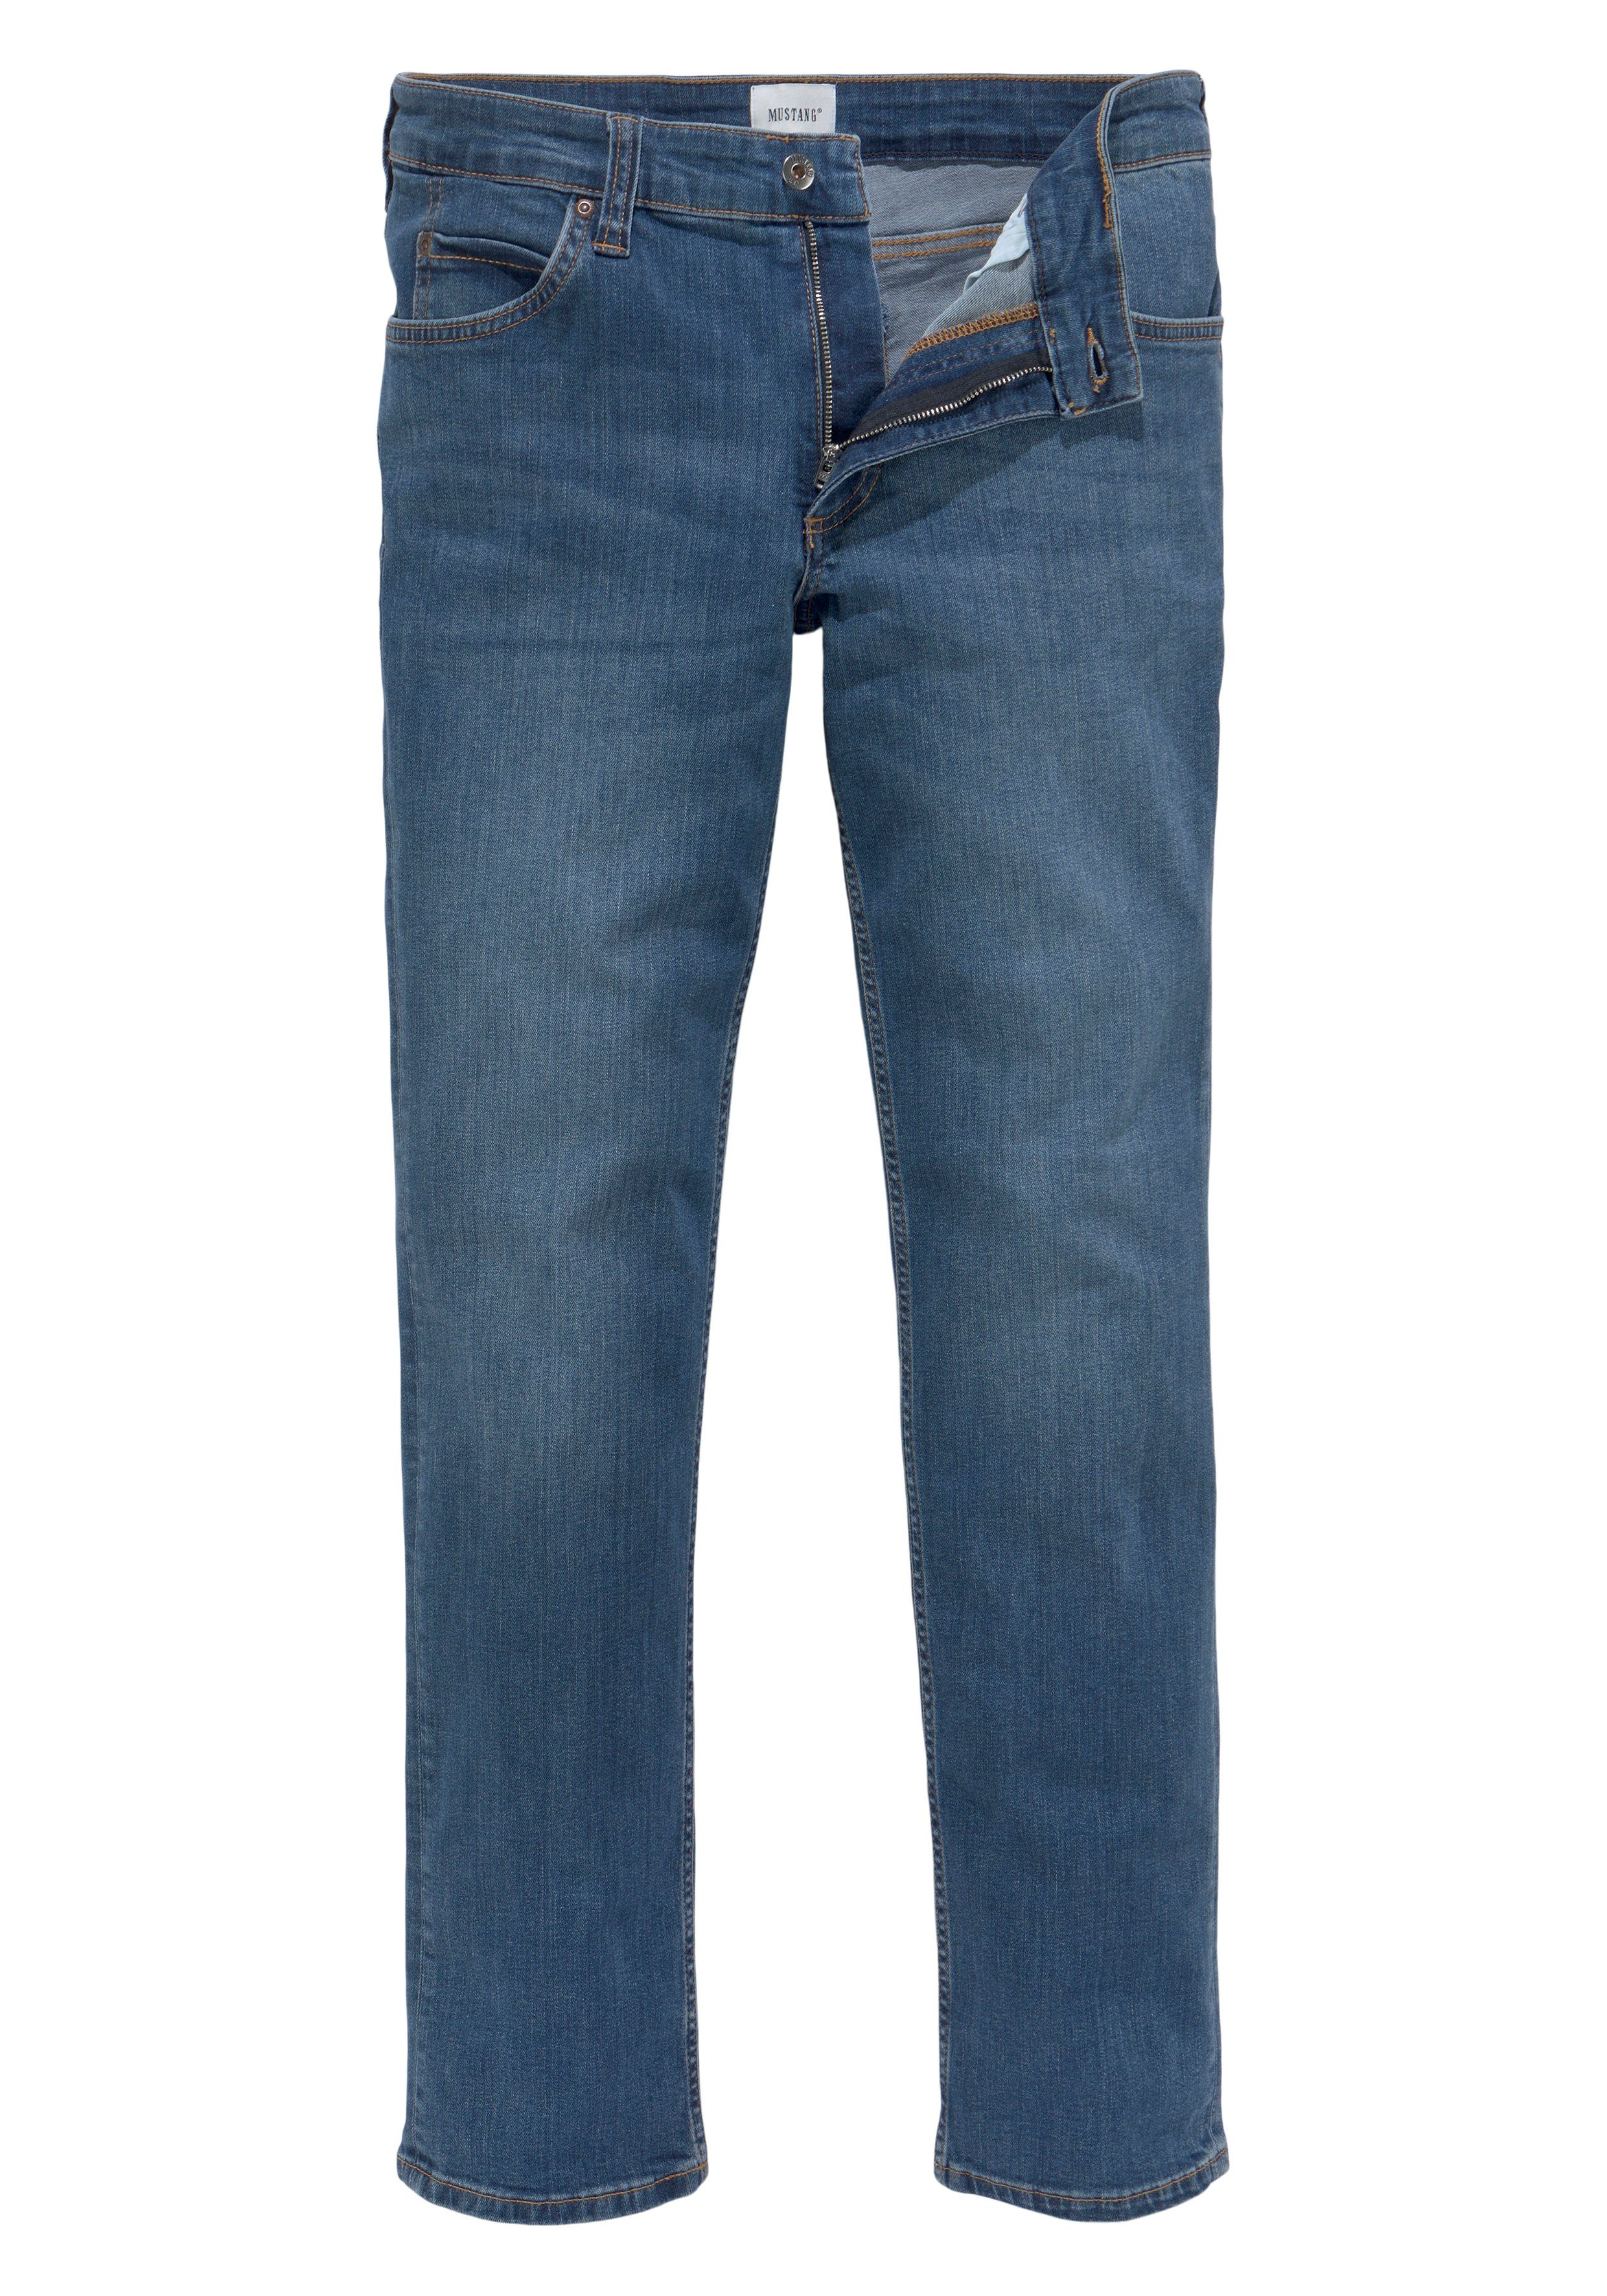 5-Pocket-Jeans washed Tramper Straight Style MUSTANG medium